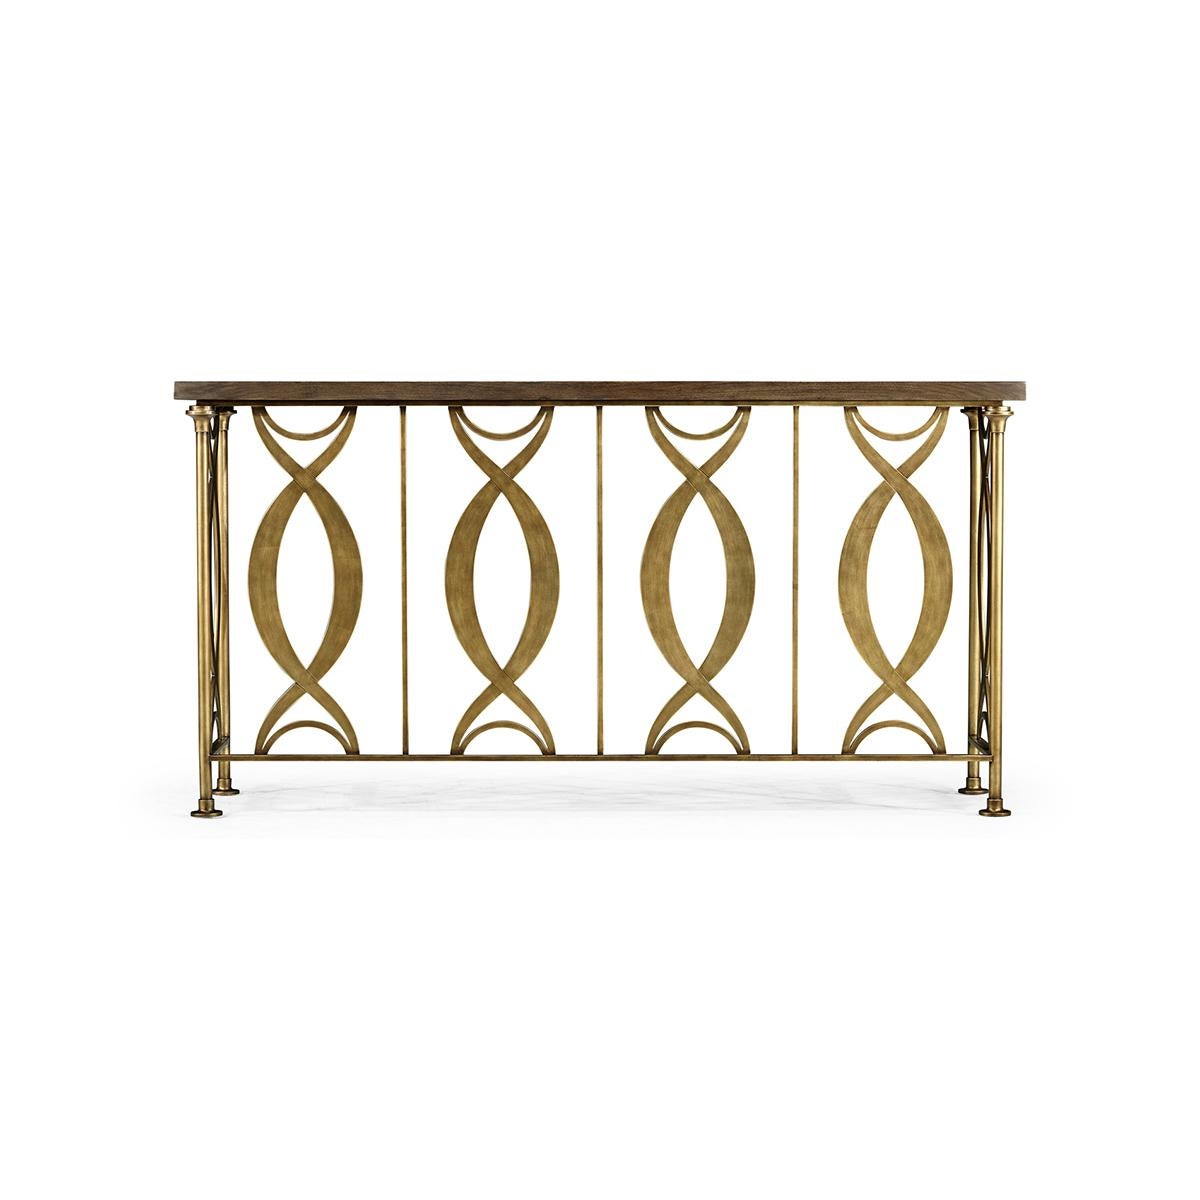 Introducing the Hollywood Regency console table, a stunning masterpiece that captures the essence of luxurious living. This table is crafted from brass with an antiqued gold leaf finish that elevates its glamour quotient. The top features a stunning